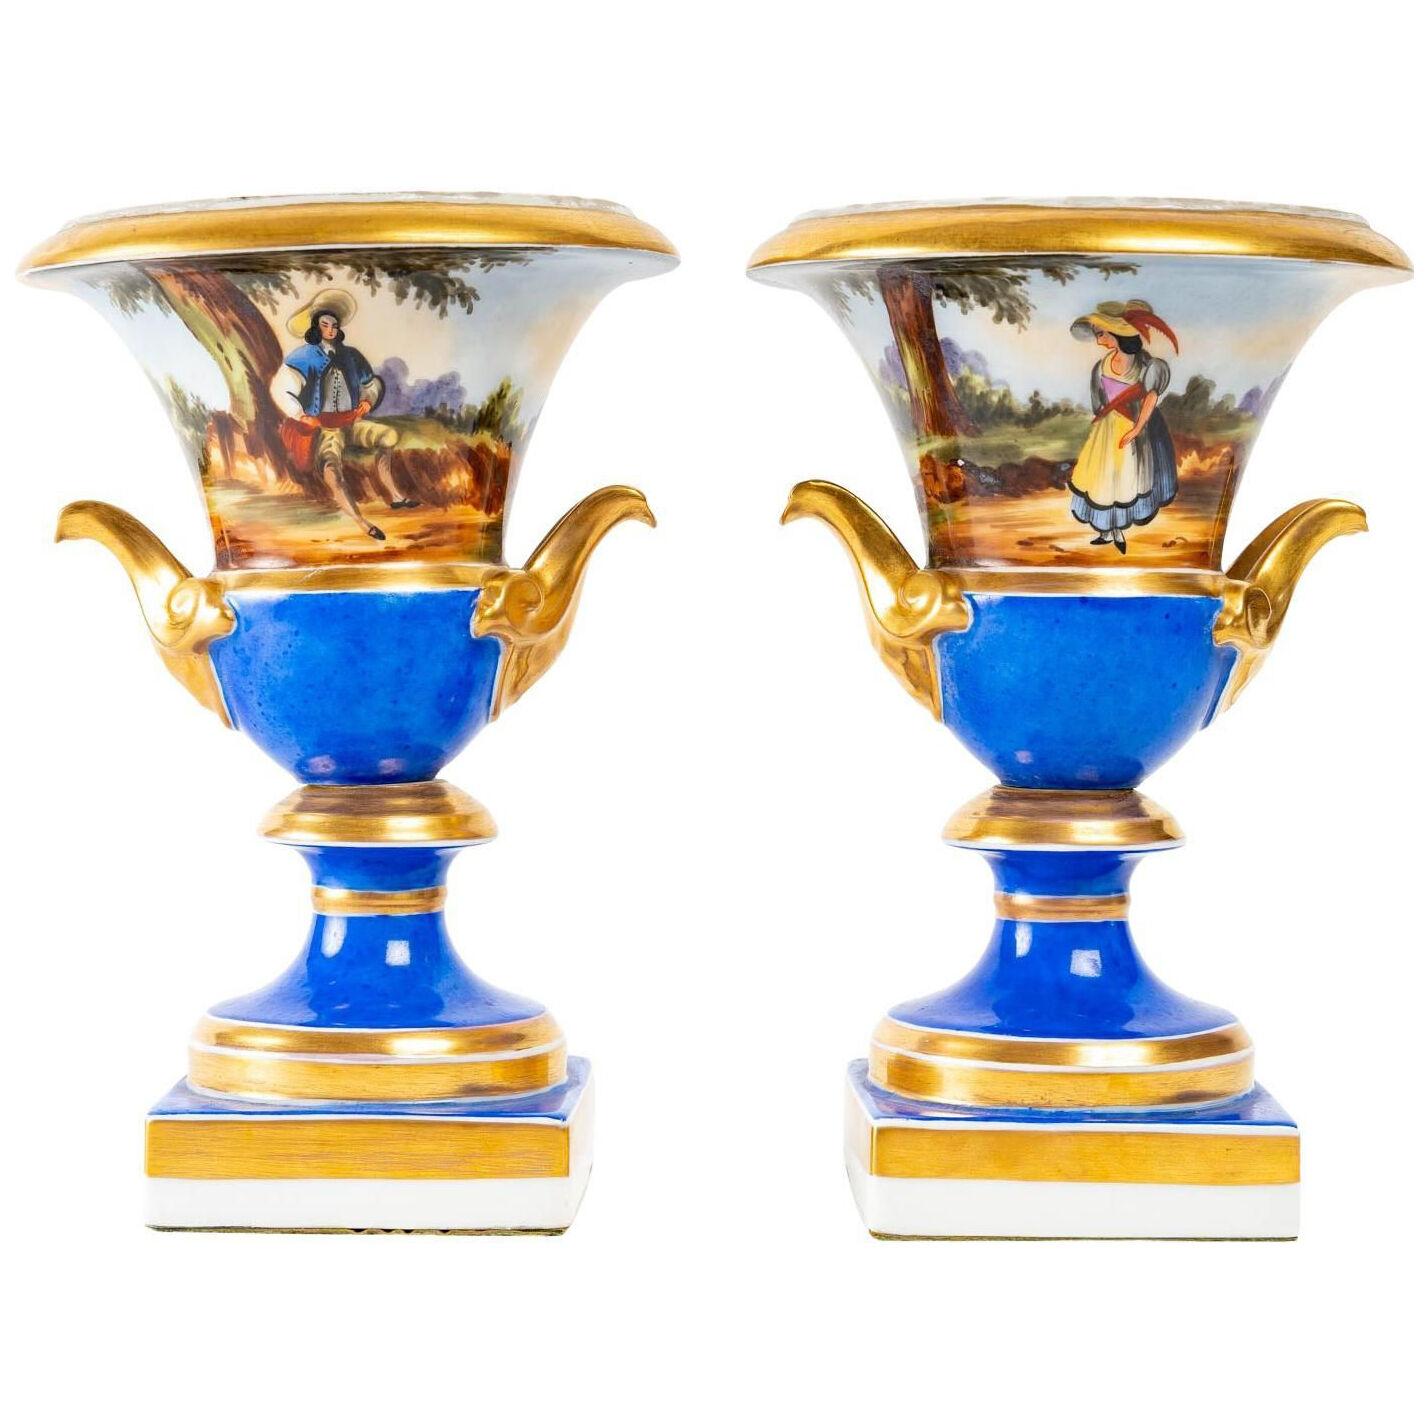 A pair of Small Medicis Vases